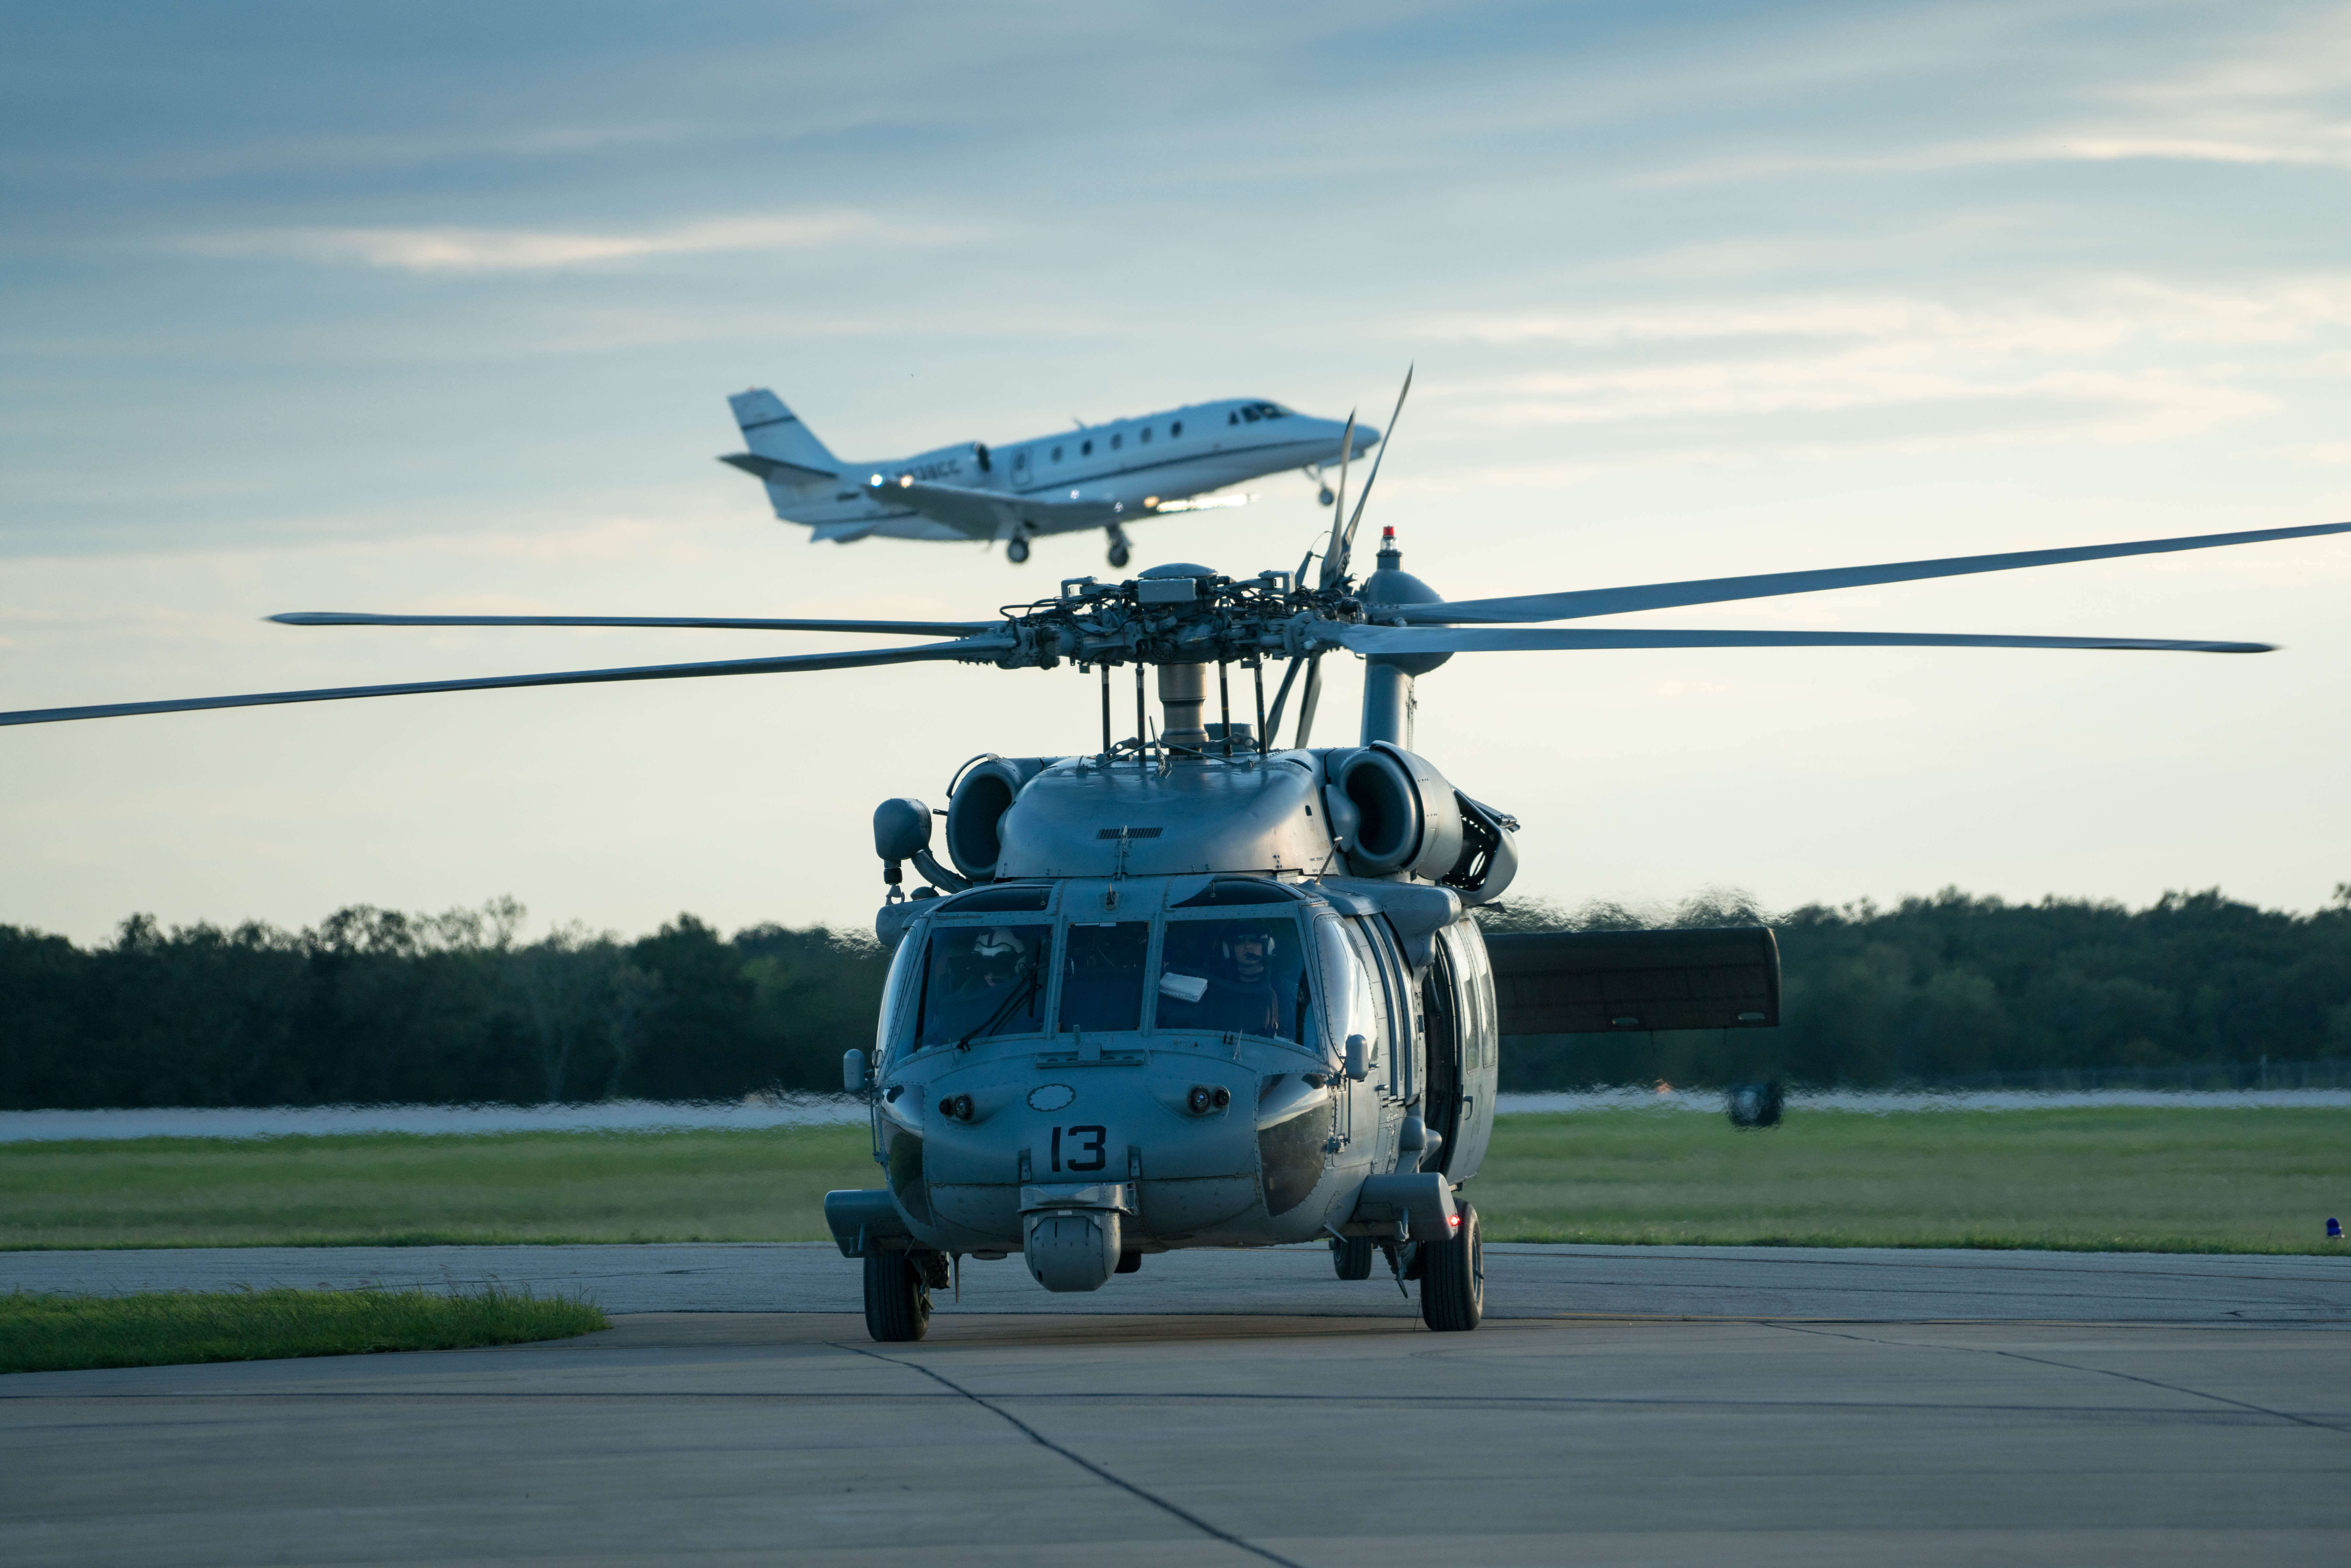 An MH-60S Sea Hawk helicopter attached to Helicopter Sea Combat Squadron (HSC) 7 returns to Easterwood Airport in College Station, Texas after a search and rescue mission over the areas affected by Hurricane Harvey. U.S. Navy MC1 Christopher Lindahl Photo